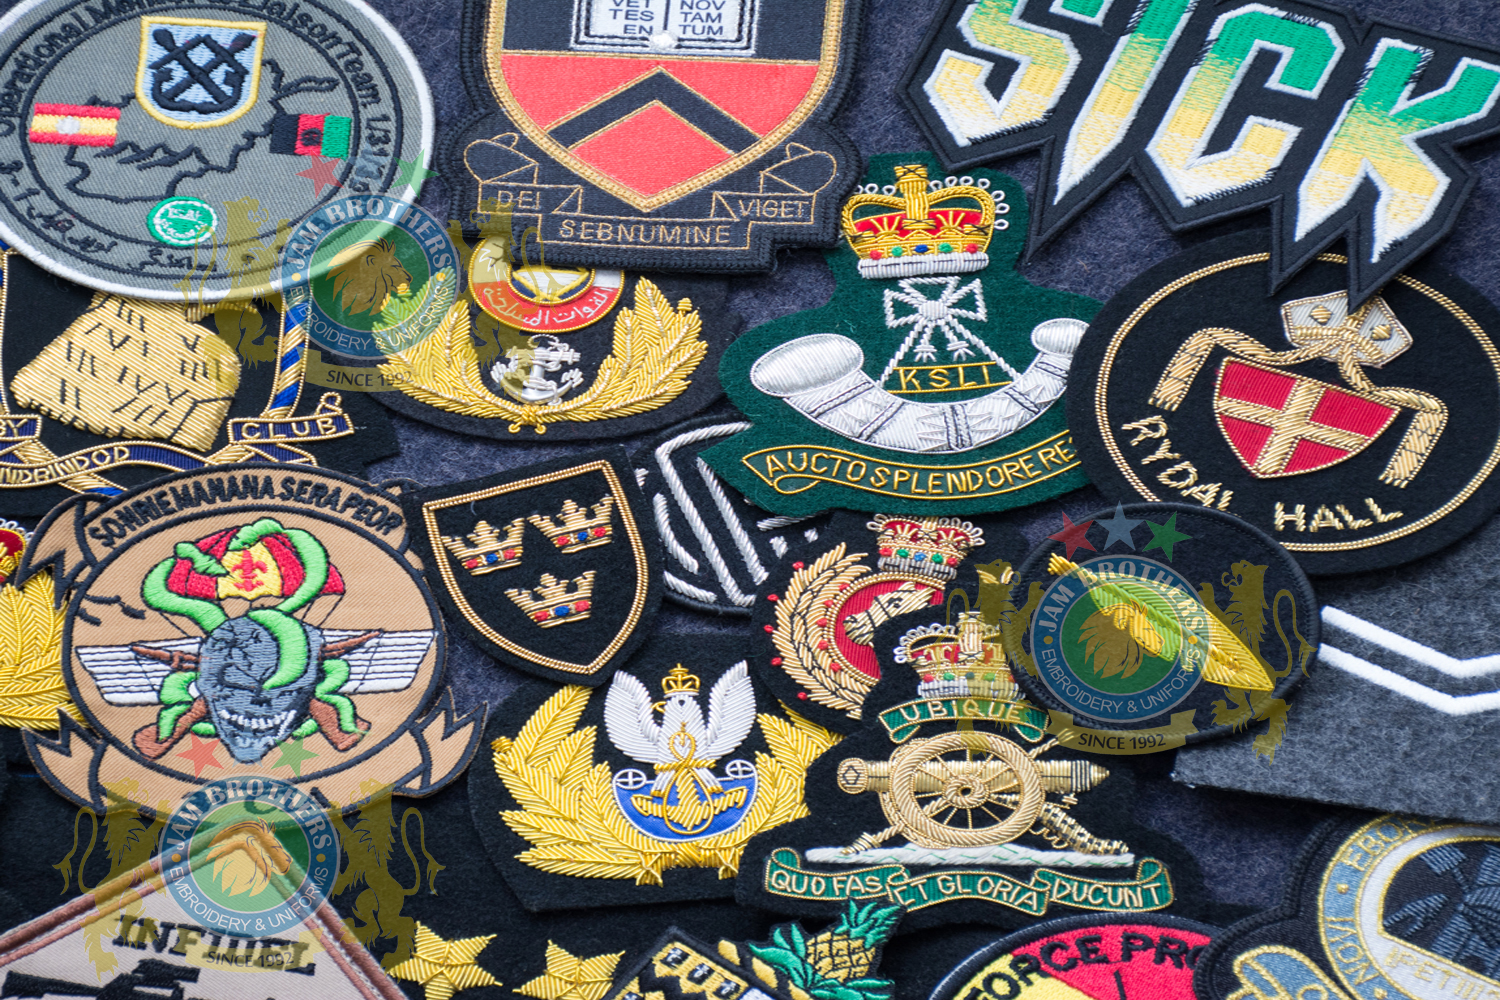 #Hand Embroidery #BullionEmbroidery #TradeBadges #MessDress #Badges #Ranks #Regiment #Parade #Ceremonial #Cord #Textile #ArmedForces #BritishArmy #Army #Aiguillette #Military #MilitaryUniforms #Militaria #Insignia #Headwear #Caps #OfficerCaps #UniformCaps #PeakCaps #DressCaps #MilitaryCaps #RailCap #Berets #Glengarry #RoyalNavy #RoyalMarine #RoyalAirForce #RAF #Infantry #Armor #EME #Battalion #Medals #Ribbons #Braid #Lace #Uniforms #UniformSupplie #Police #Security #Buckles #Guards #Accoutrement #Badge #Patch #Machine #MachineEmbroidery #HandEmbroidery #Bullion #BullionBadges #BullionEmbroidery #WovenBadges #Woven # Emblems #Regiment #Regimental #OfficerCaps #PeakCaps #Soldier #Helmets #Covers #HelmetCovers #Armlets #Sliders #Epaulettes #Webbing #Chevron #Officer #ShoulderBoards #Gorgets #Tassel #Sash #Hand #HandSewn #Aviation #AviationClothing #Crest #FamilyCrest #CoatofArms #EmbroideredPillows #Cords #Aiguillettes #CapCords #ChinCord #DressCord #SwordKnot #Tassels #WhistleCord #Lanyard #Knots #Banners #ClanBadges #Peaks #Visor #Wings #CapBadges #Pennants #HonorCaps #OfficerCaps #SportsCap #Masonic #Aprons #MasonicAprons #Collars #MasonicCollars #Gloves #MasonicGloves #MasonicPatches #Patches #Regalia #MasonicRegalia #Freemason #Braid #Chevron #Cuffs #Fringes #Sashes #HeadGear #FieldGear #England #USA #Poland #ArmedForces #Schools #Colleges #University #Sialkot #Pakistan Sialkot Pakistan PeakCaps OfficerCaps ShoulderRanks BullionBadges UniformAccessories MilitaryUniforms DressCap TradeBadge RankMarking WireBadges Army Airforce Navy Police Hand Machine Embroidery Badge Emblems Patches Bullion Wire Silver Gold